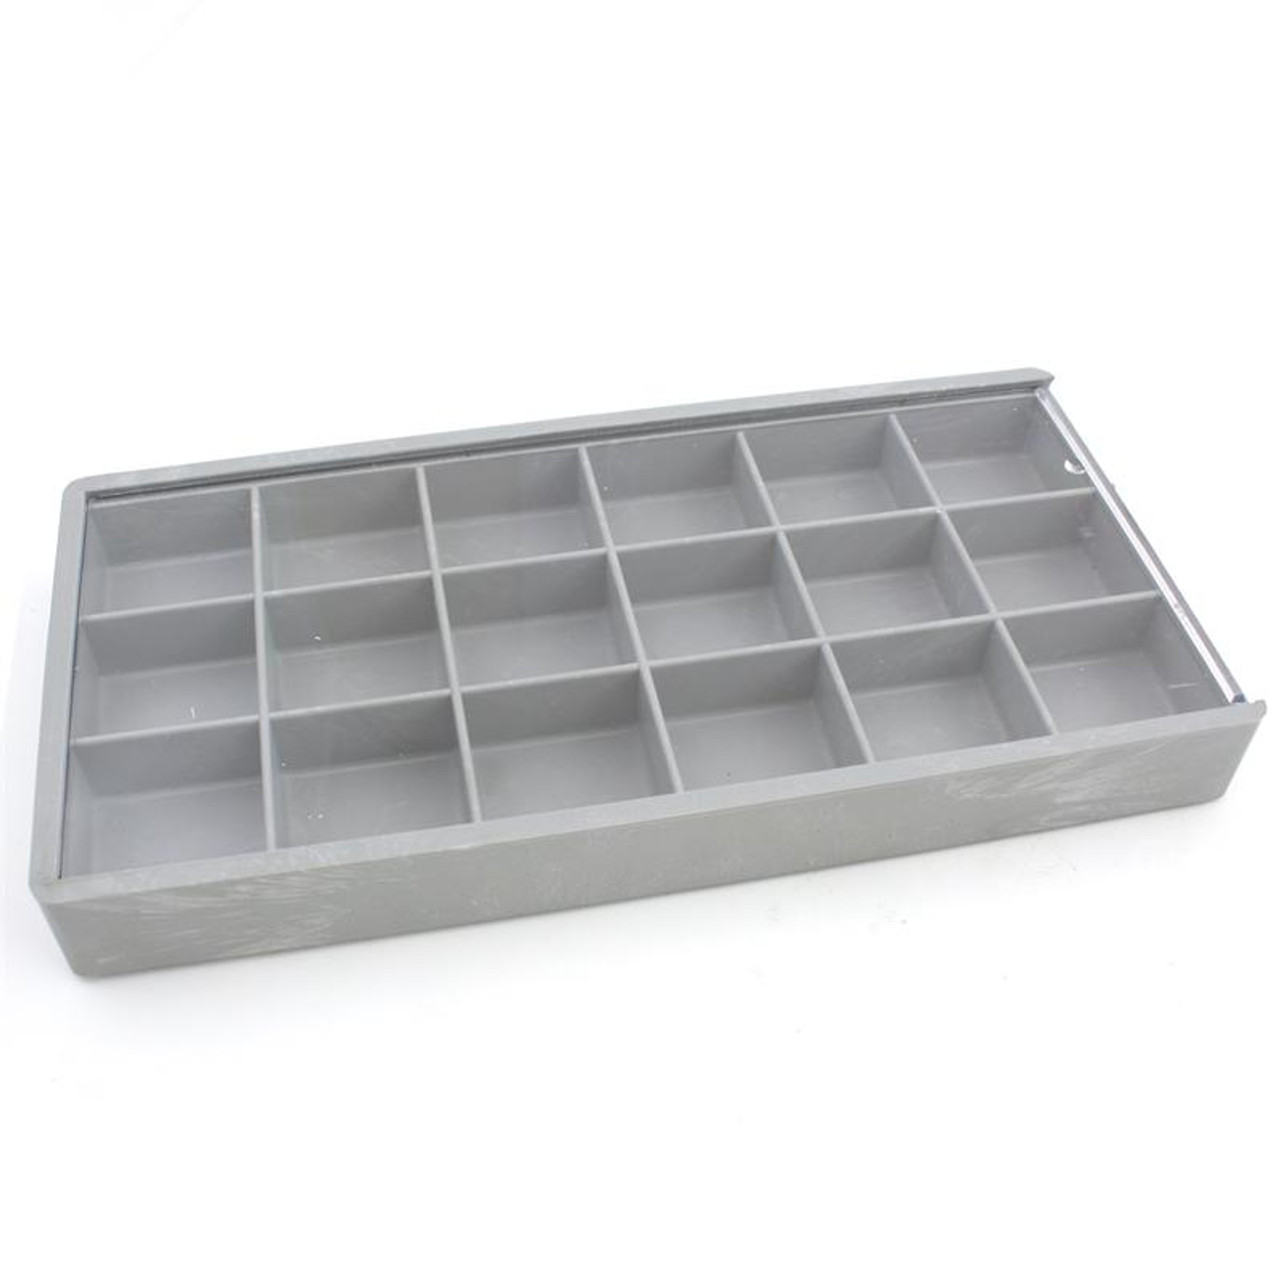 18 Compartment Plastic Tray Organizer with Clear Locking Sliding